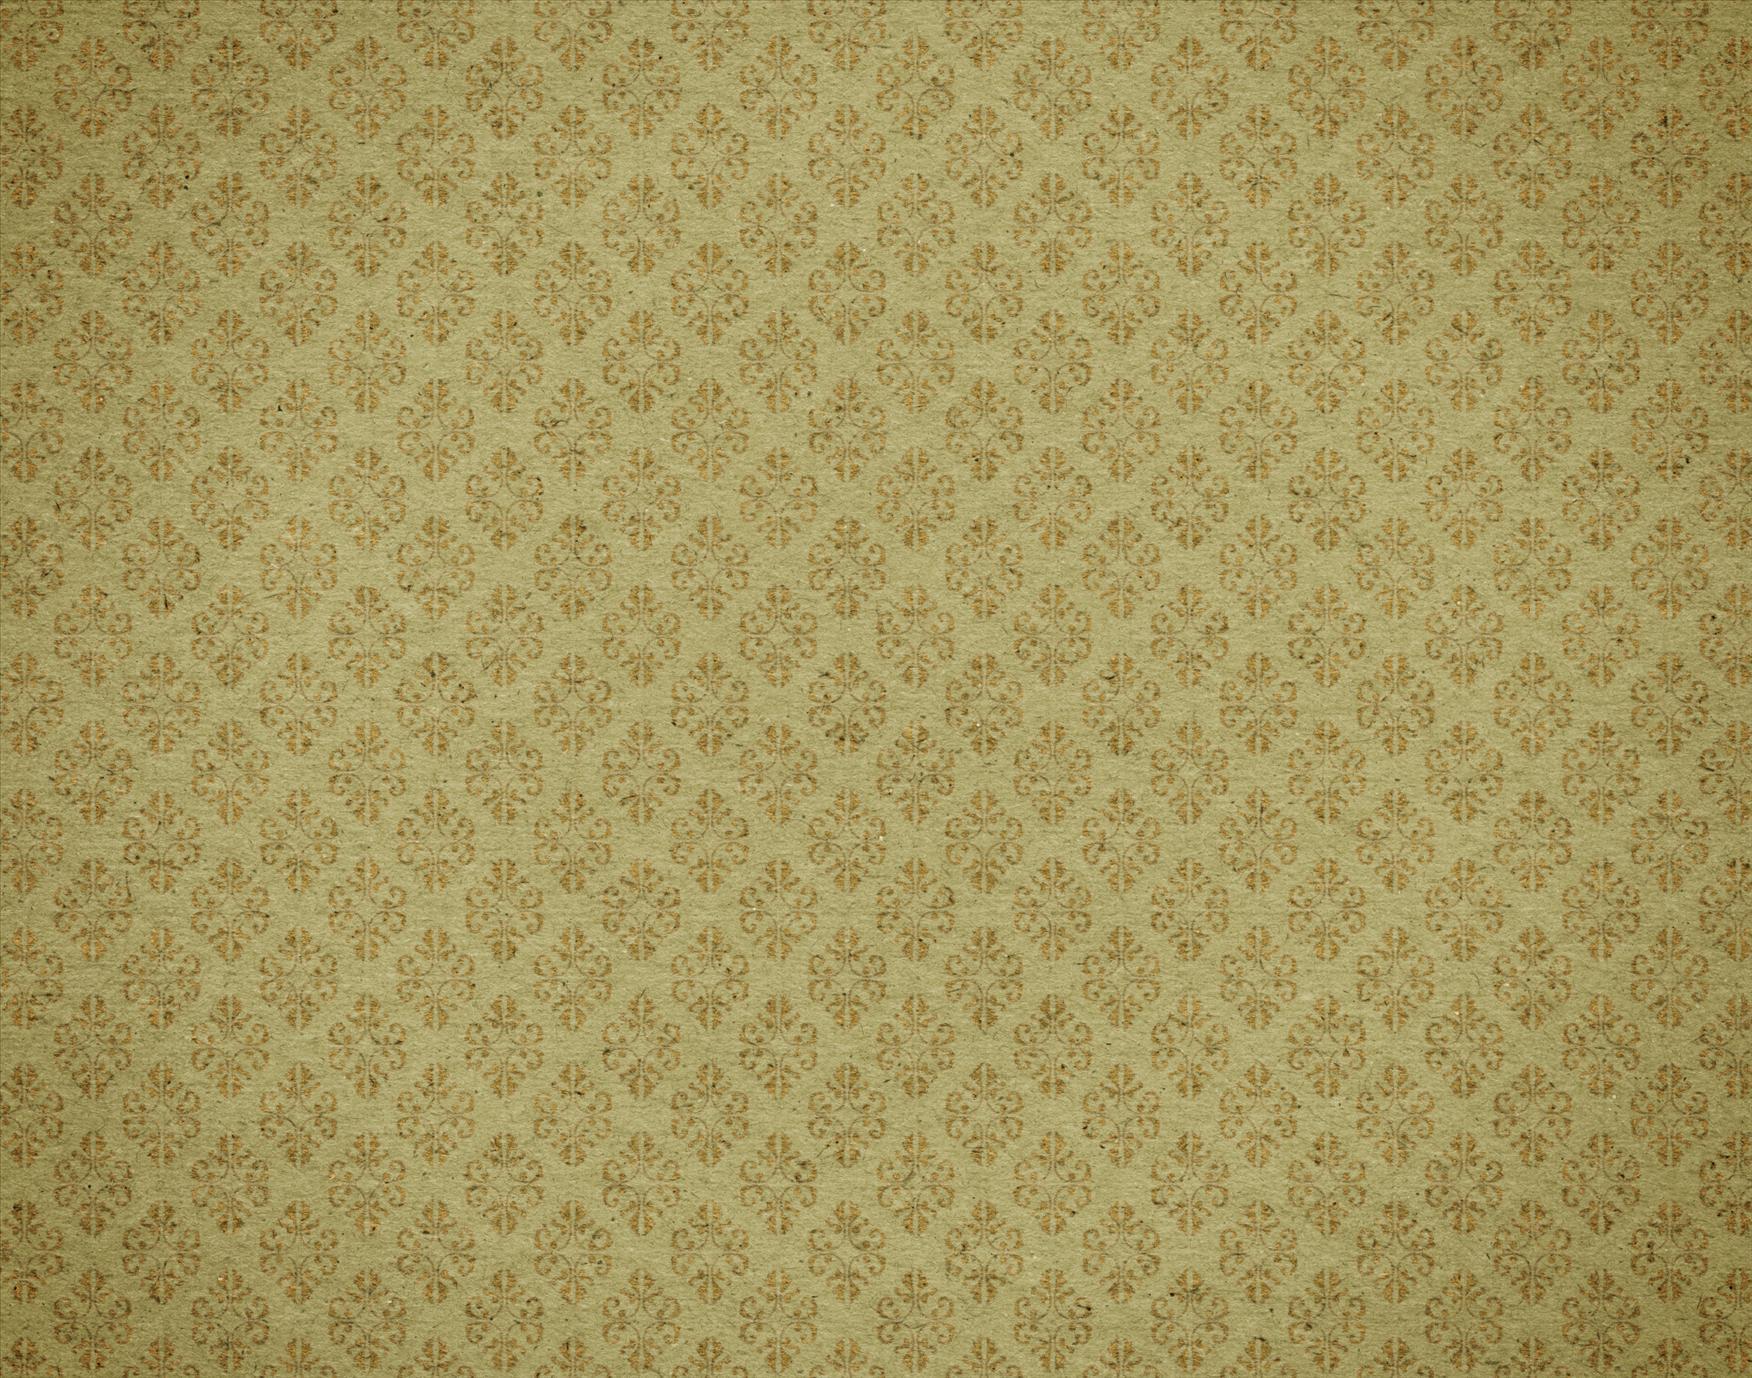 Free Vintage Backgrounds Wallpapers